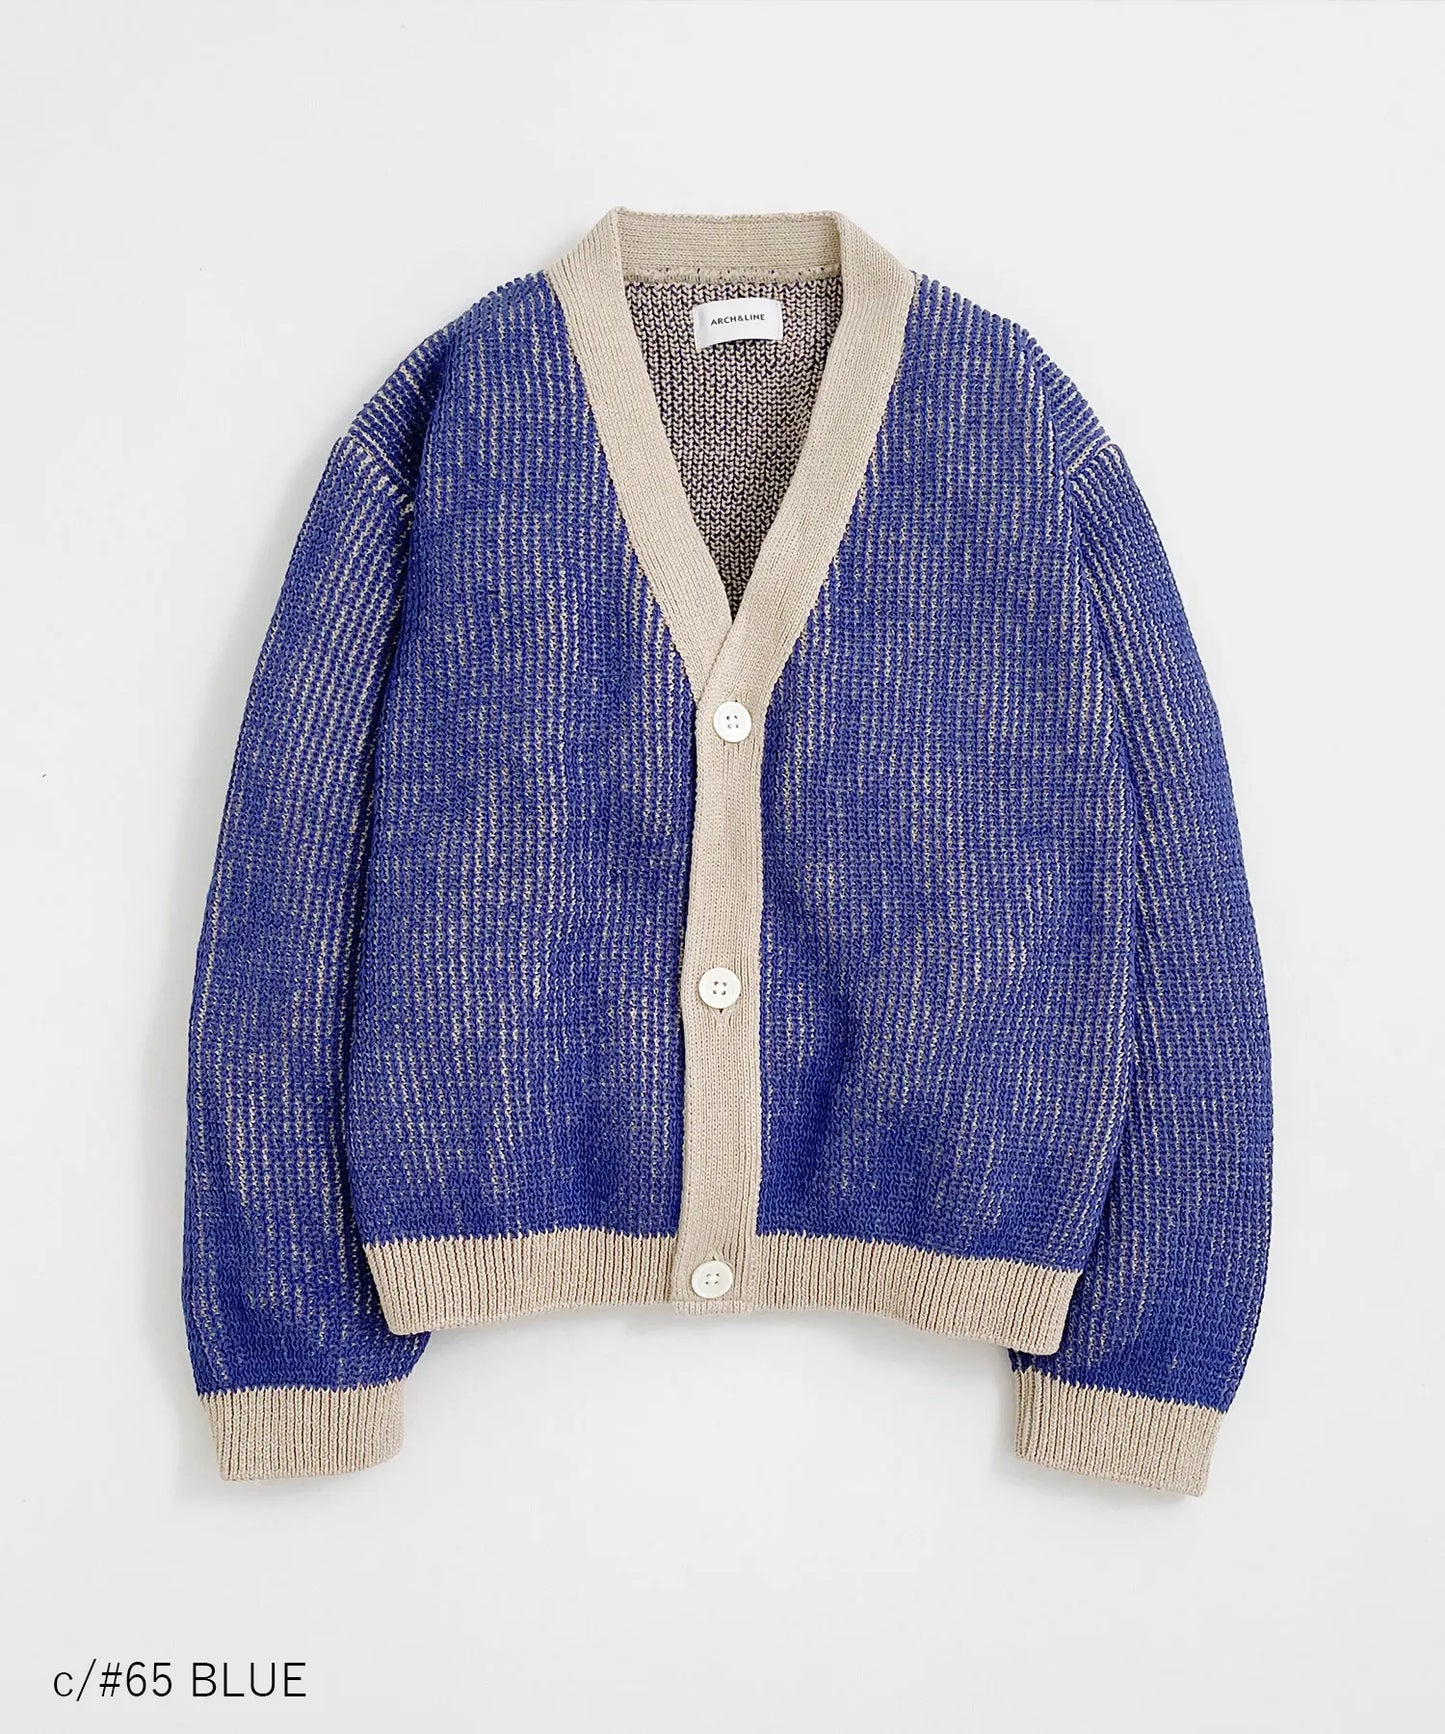 GIMA STRIPE KNIT CARDIGAN Made in Japan 100% Cotton Occasion [145-175cm]